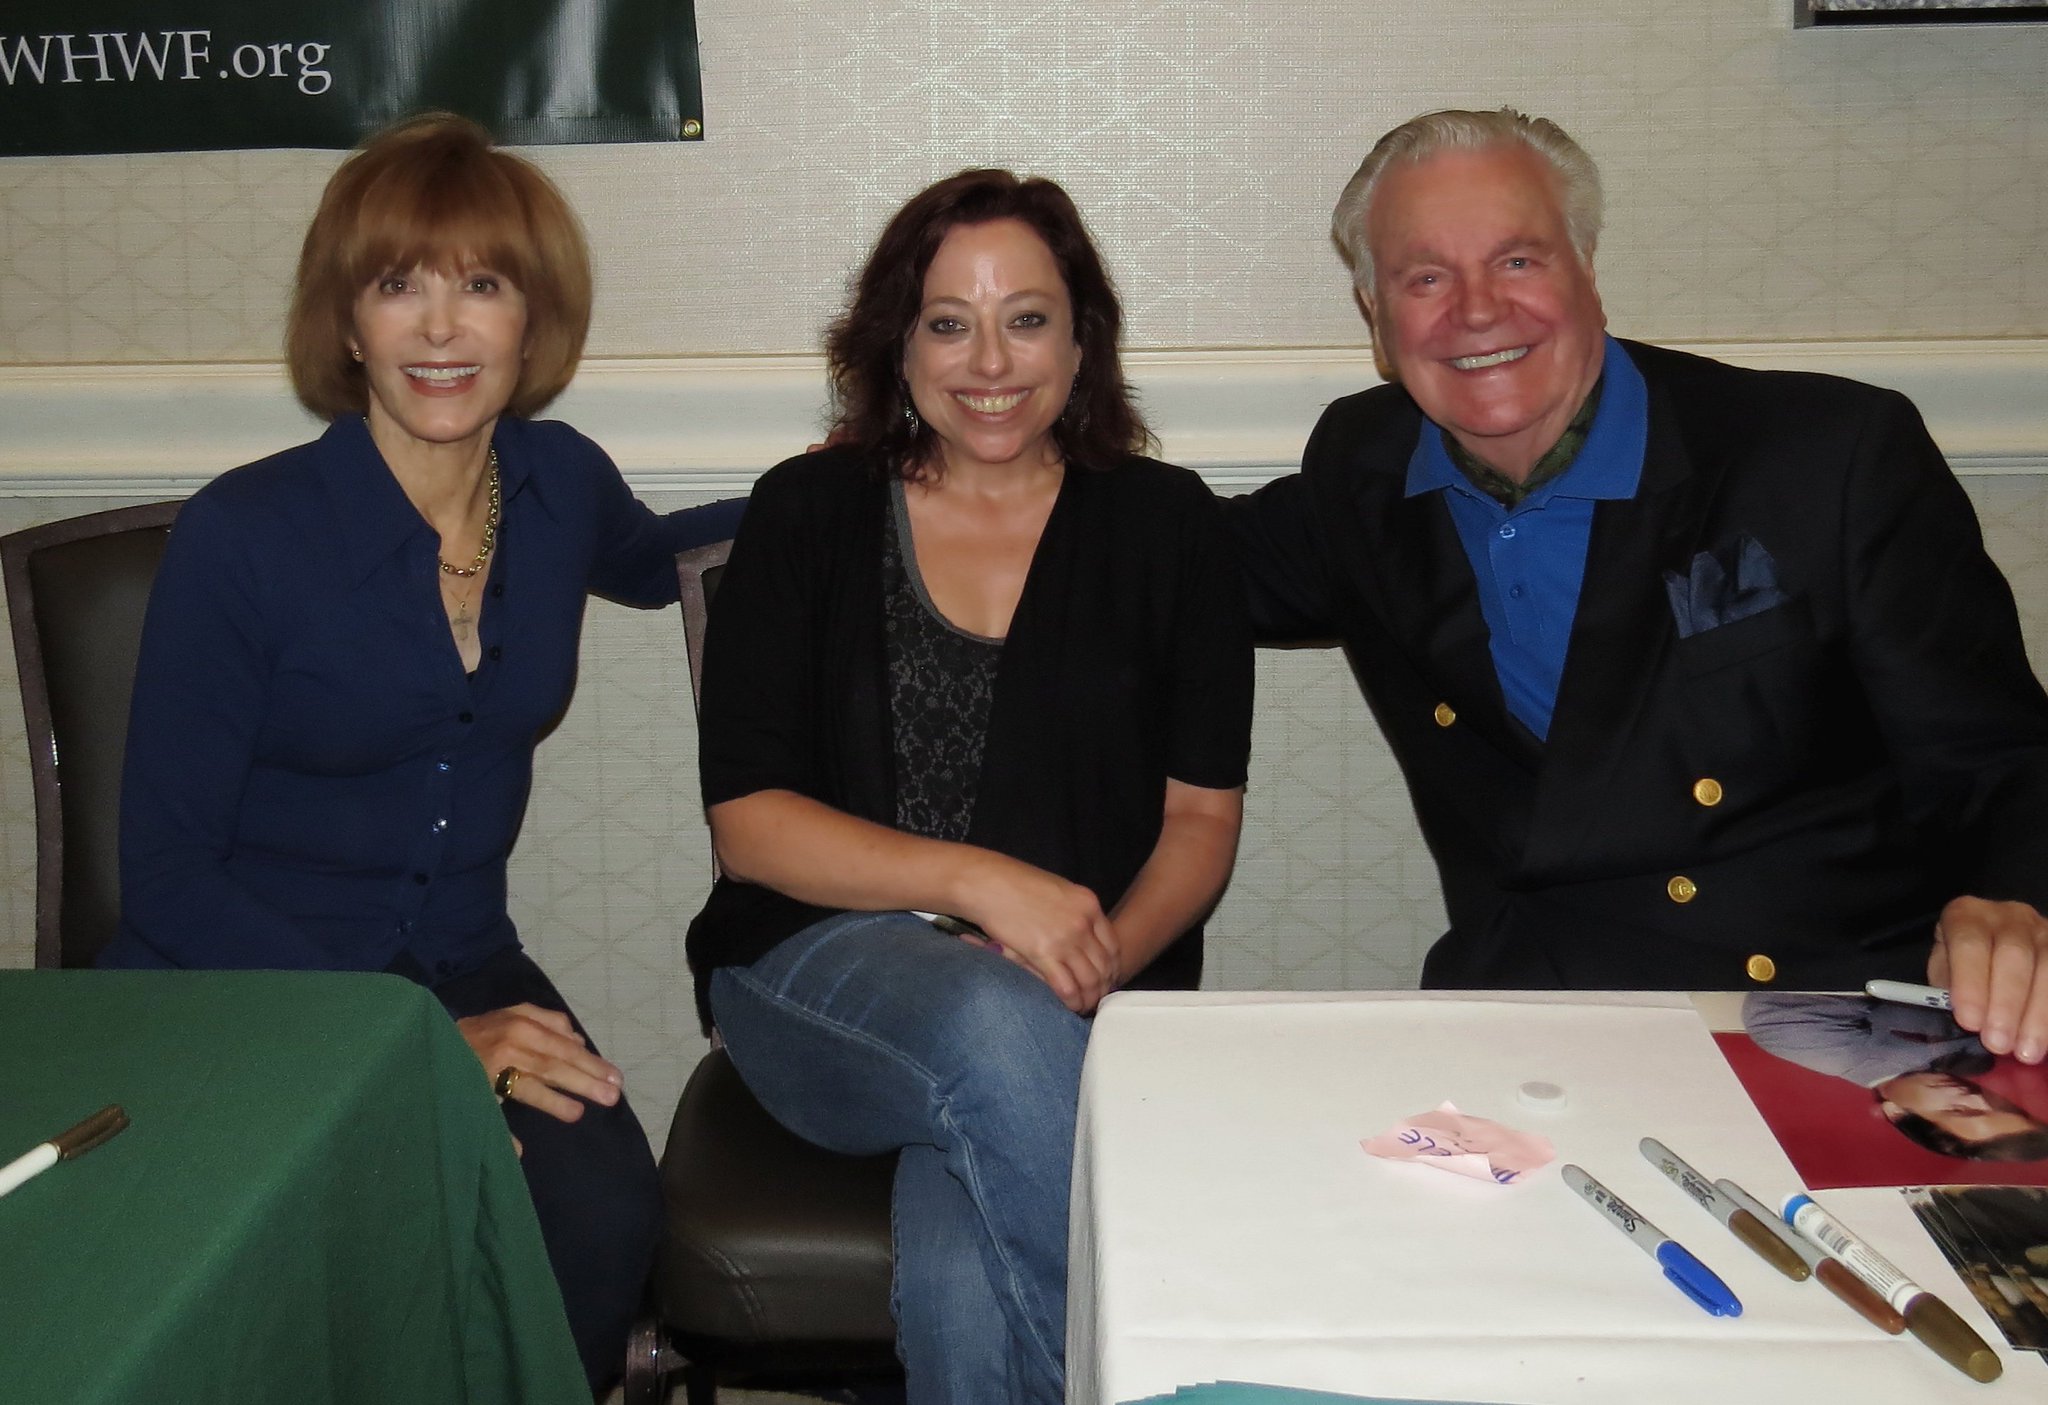 Happy birthday to Stefanie Powers today! This was such a fun weekend. 